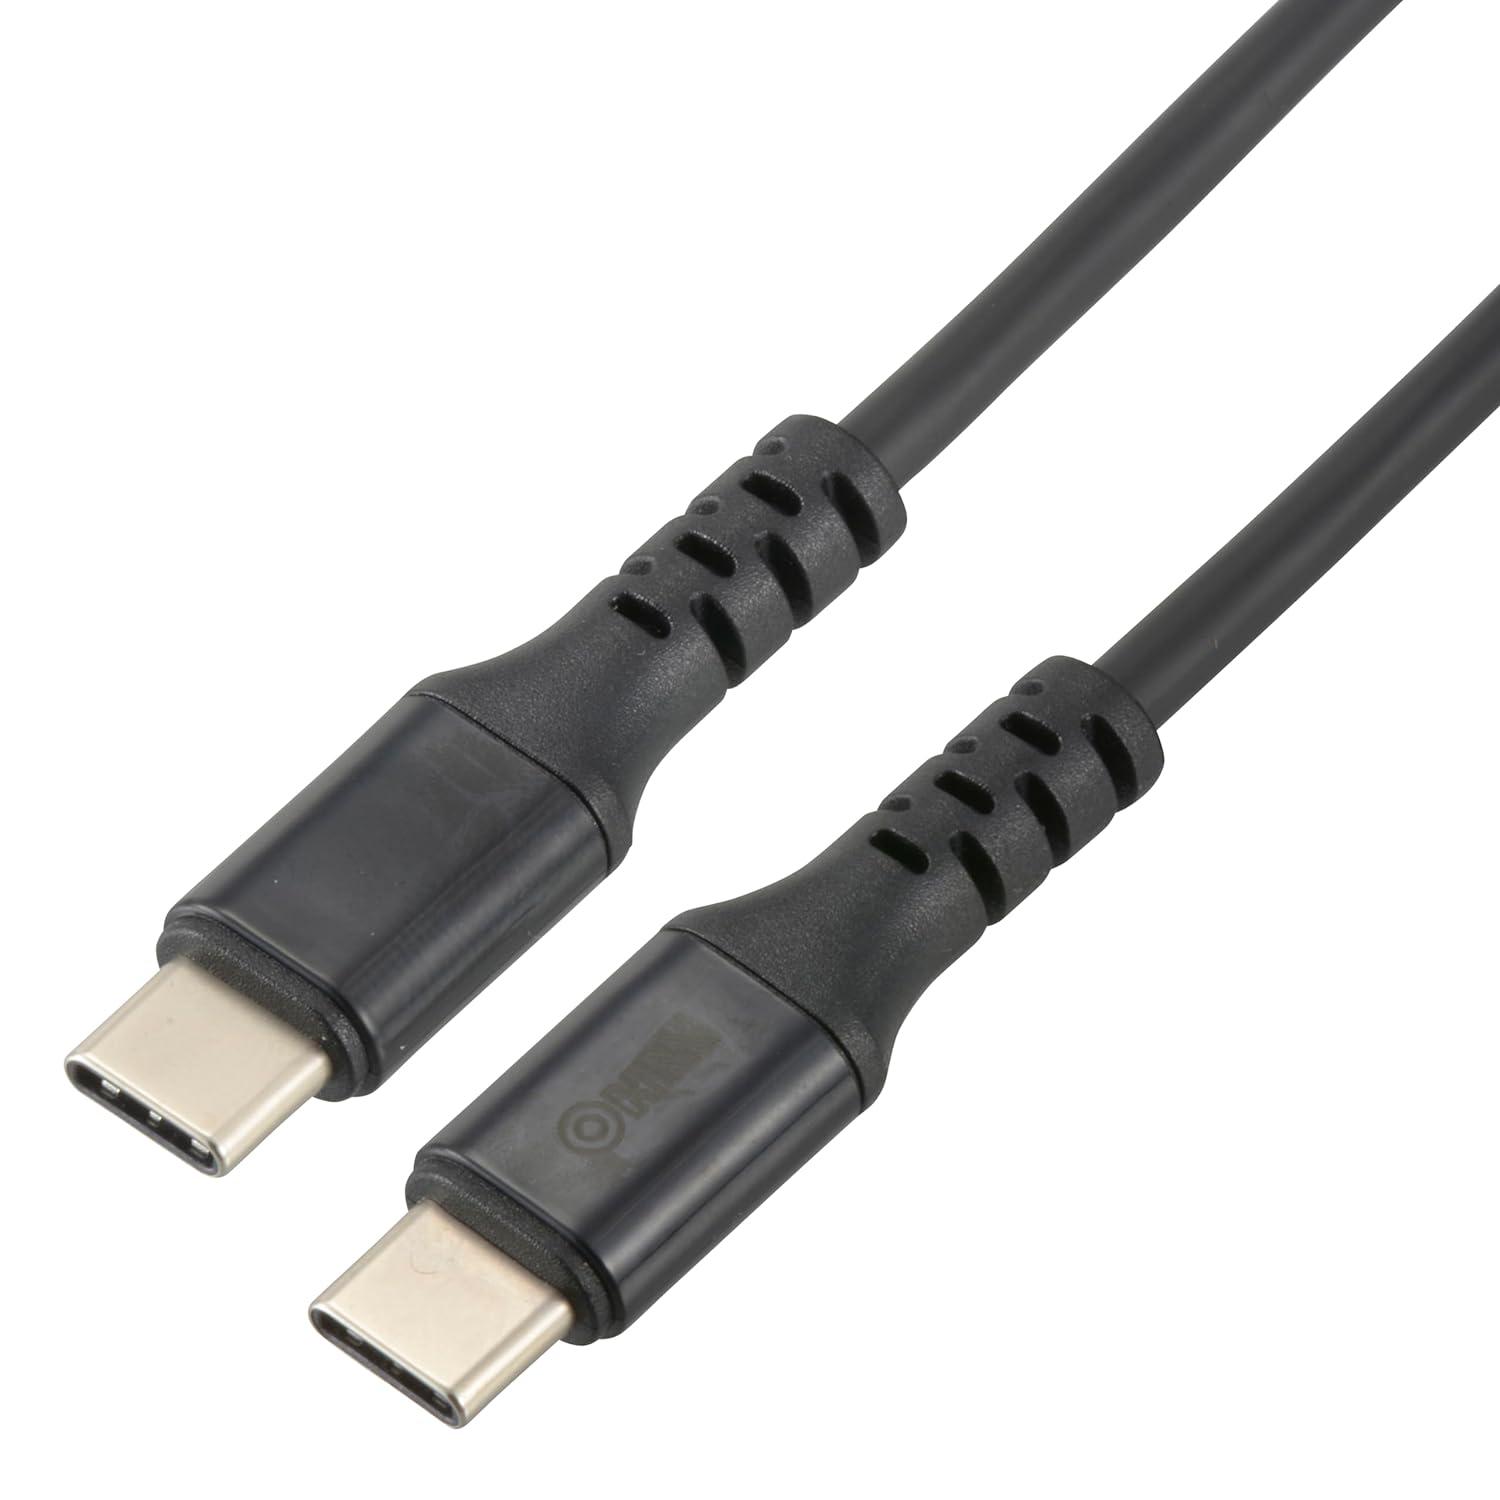 PDΉType-CP[u(OubV`/USB Type-C to Type-C/2m/ubN) SMT-L20PD-K